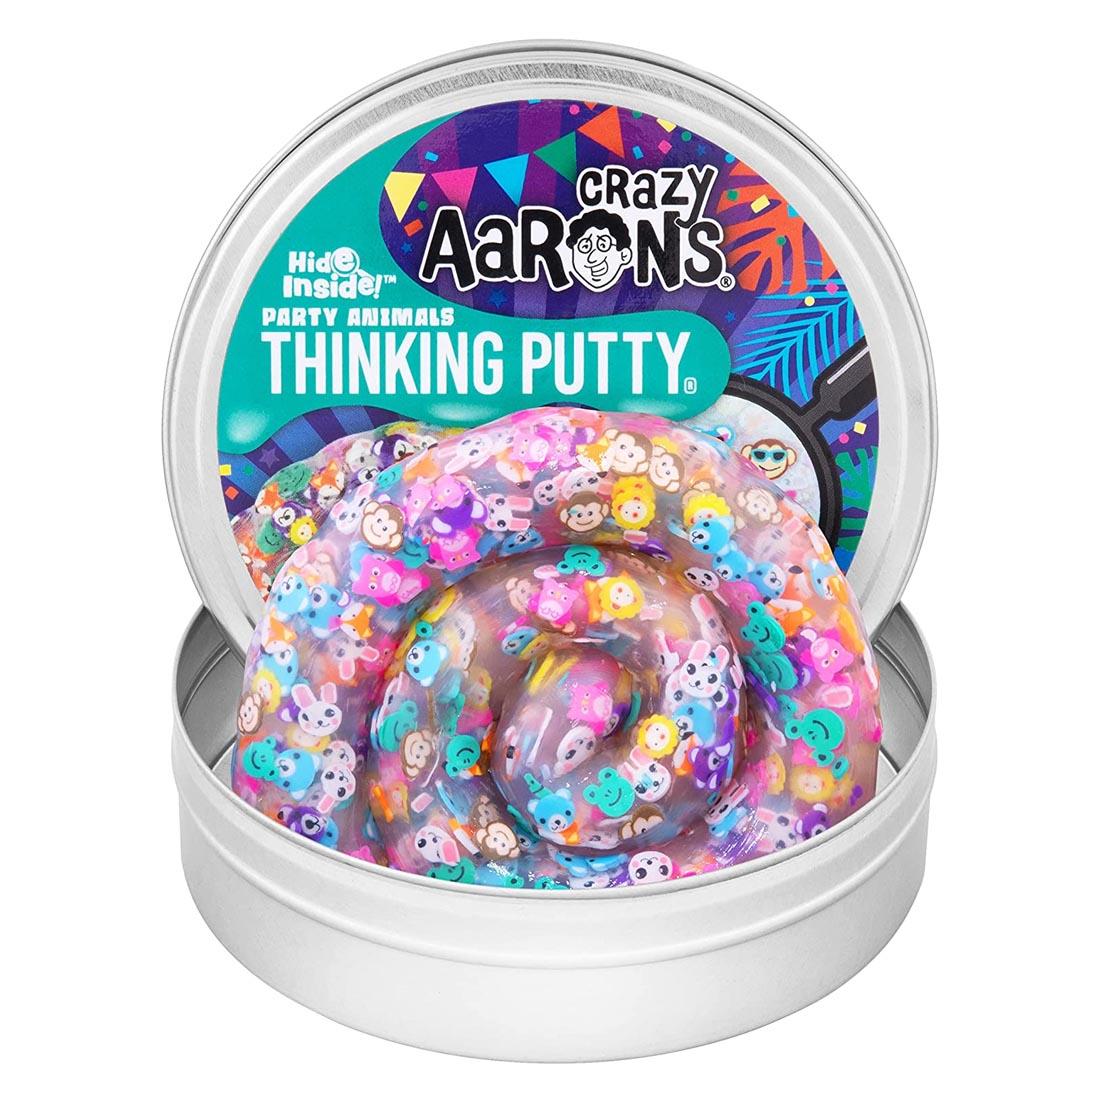 opened tin of Party Animals Thinking Putty by Crazy Aaron